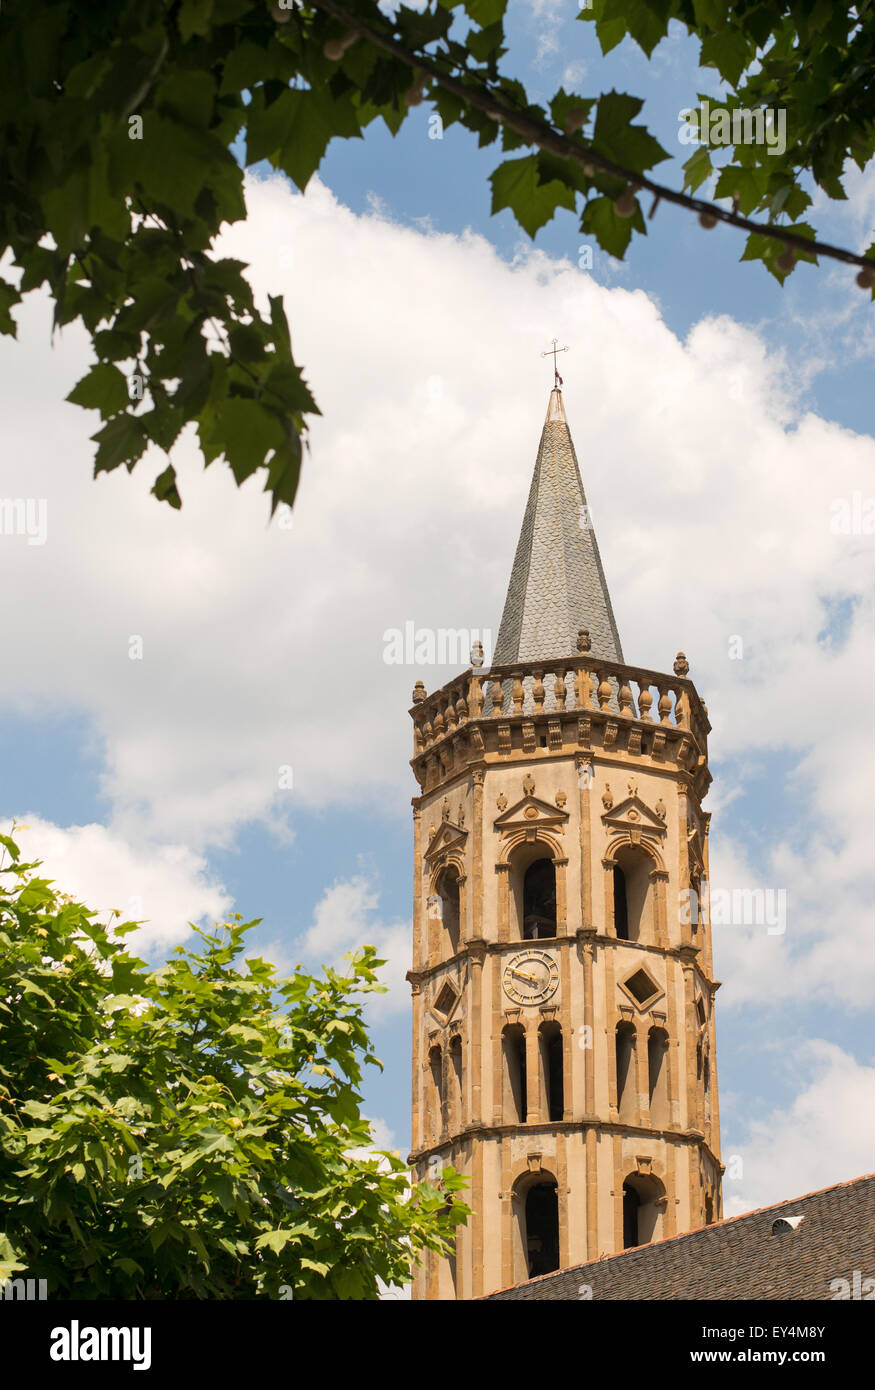 Bell tower of the Notre-Dame-de-l'Espinasse church Millau, Averyon,  Midi-Pyrenees, France, Europe Stock Photo